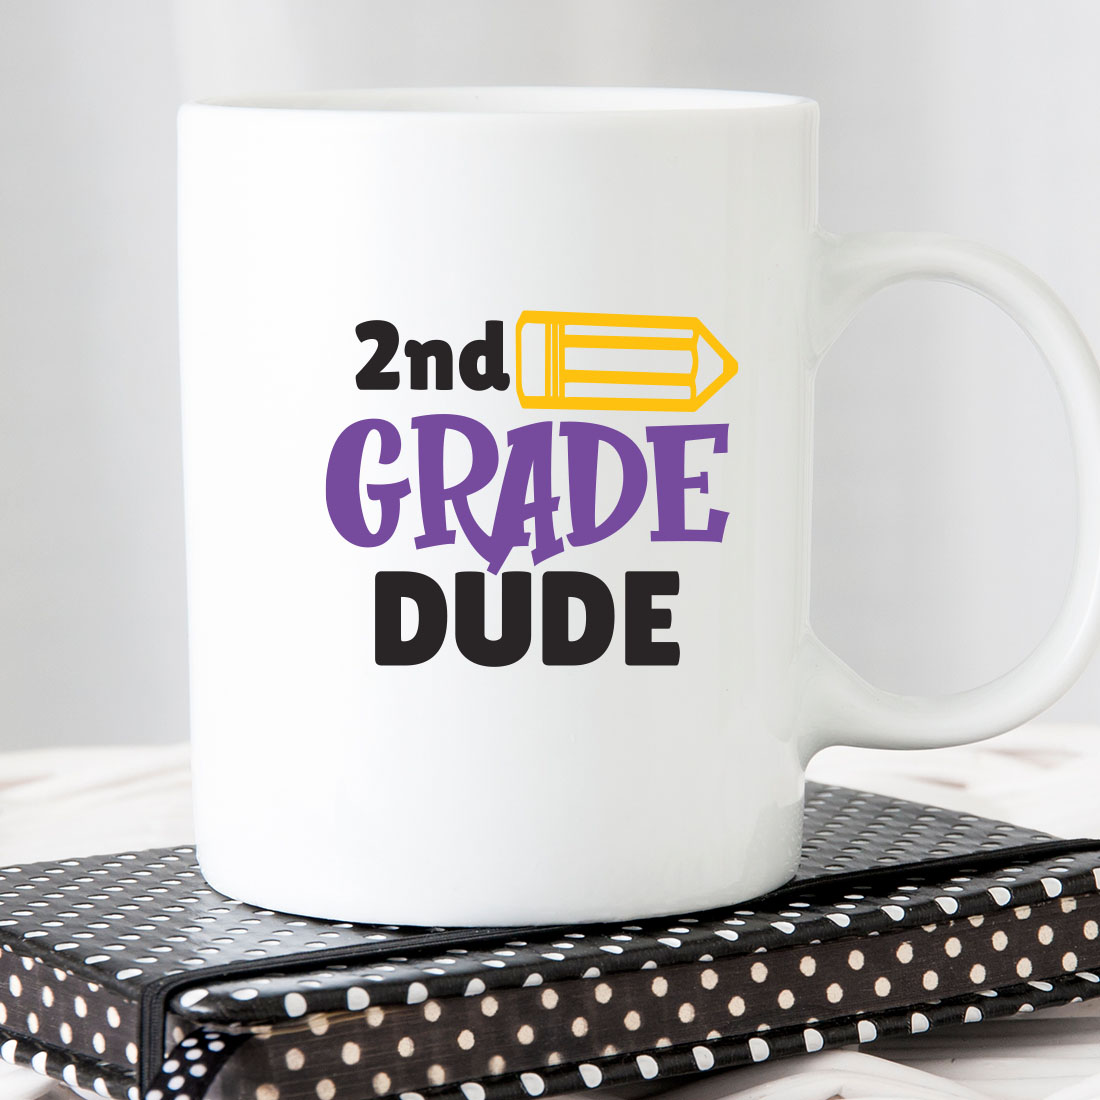 White coffee mug with the words 2nd grade dude on it.